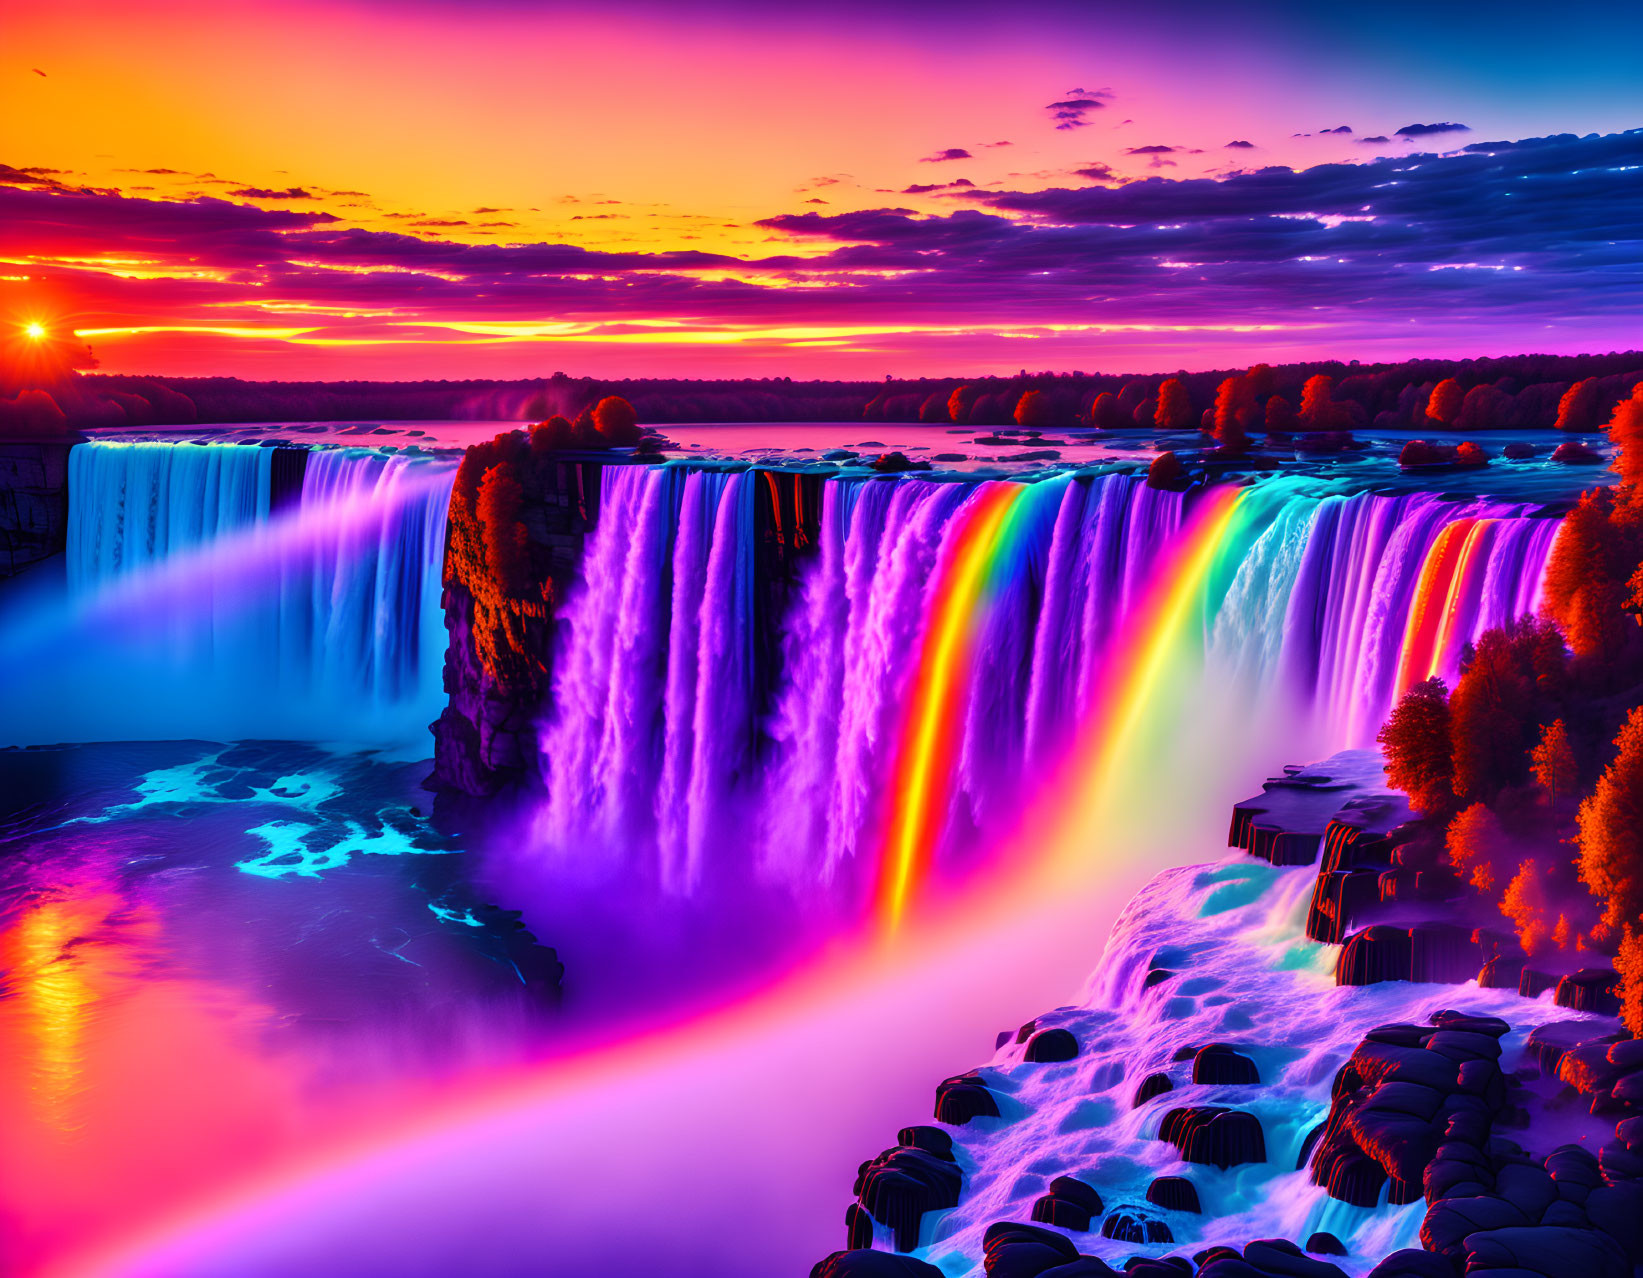 Colorful sunset over waterfall with rainbow hues merging into cascading water